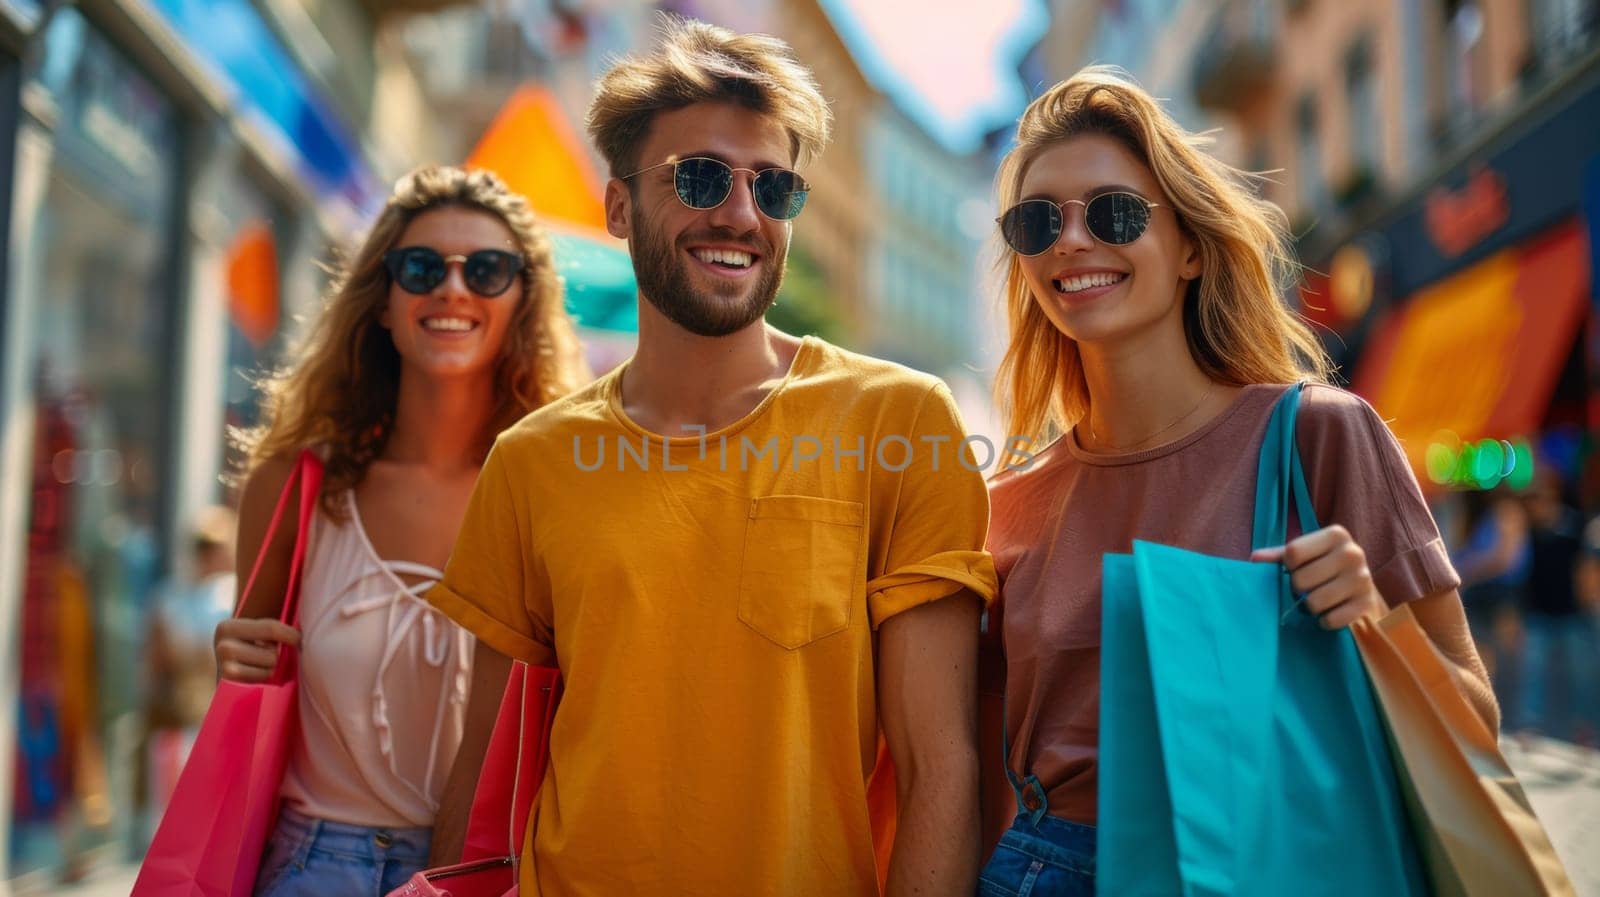 Three people standing in a street with shopping bags, AI by starush